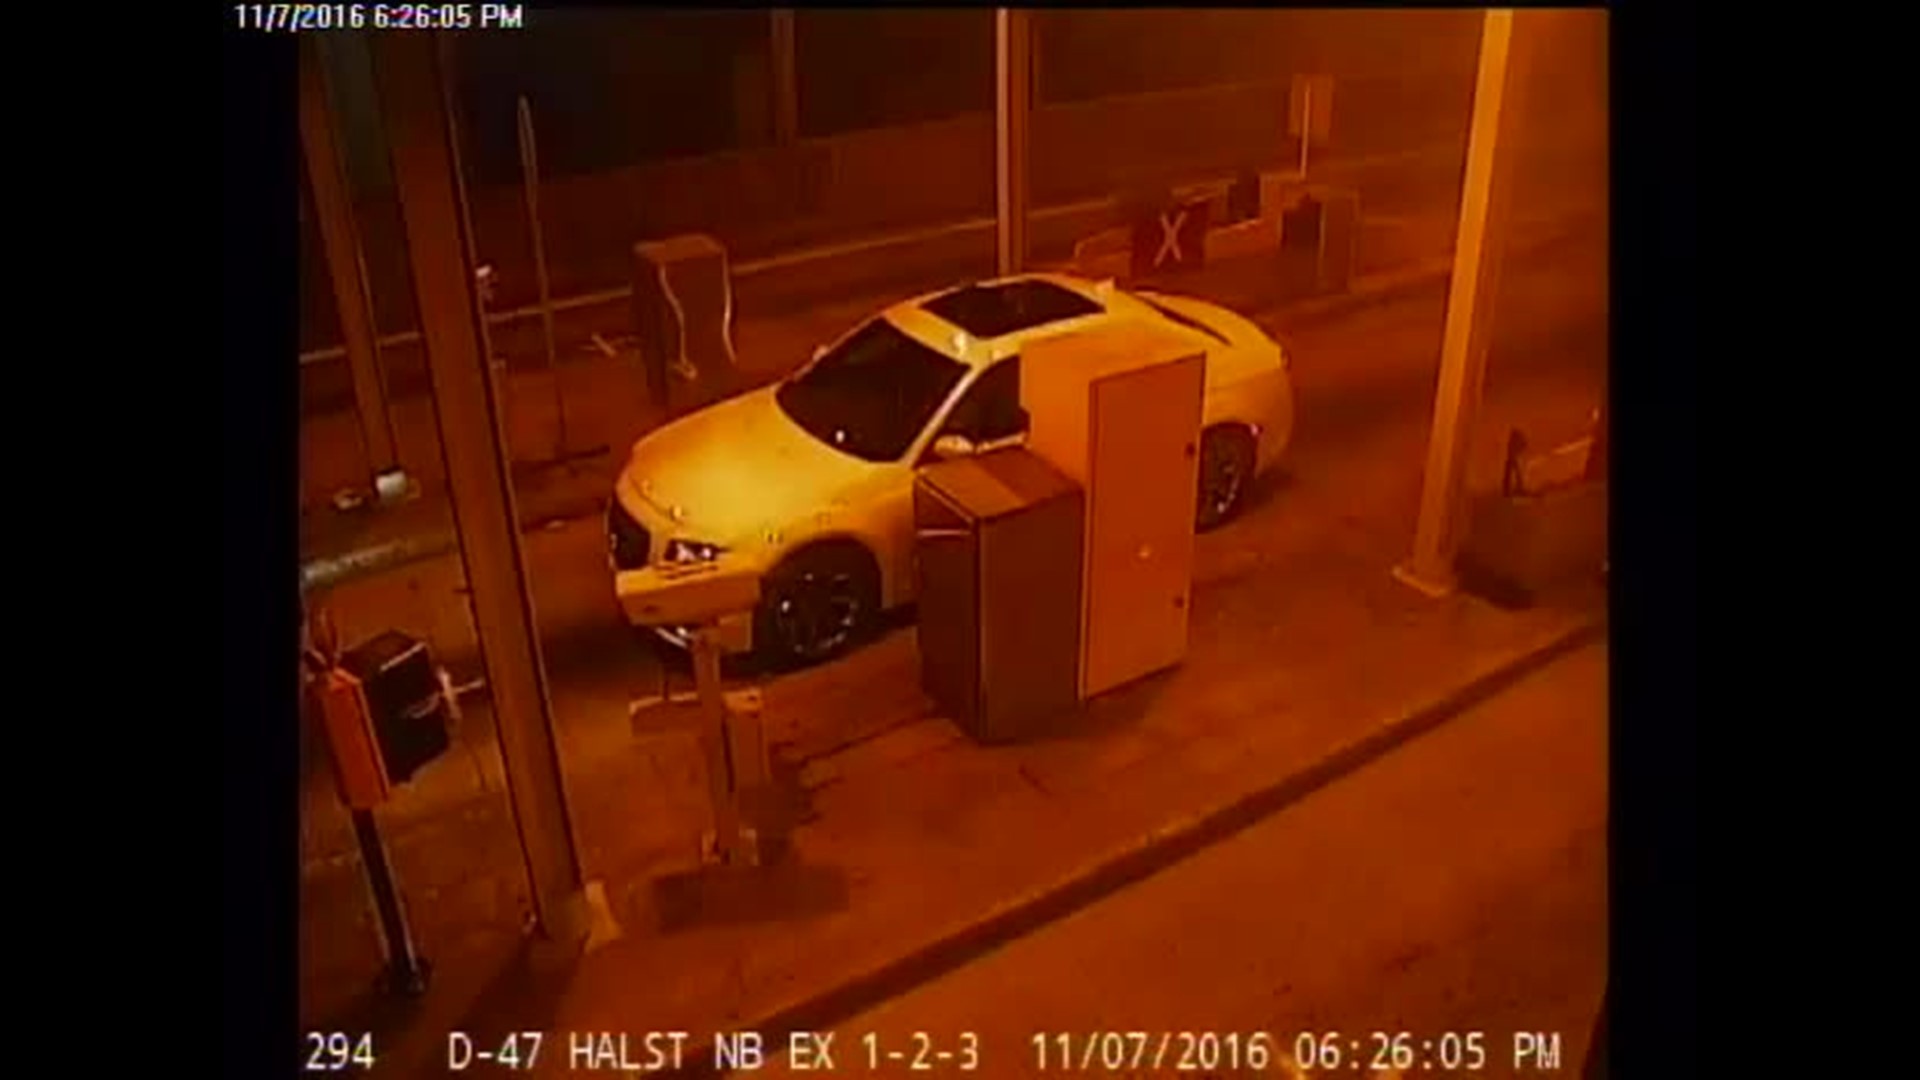 Surveillance video from just before incident